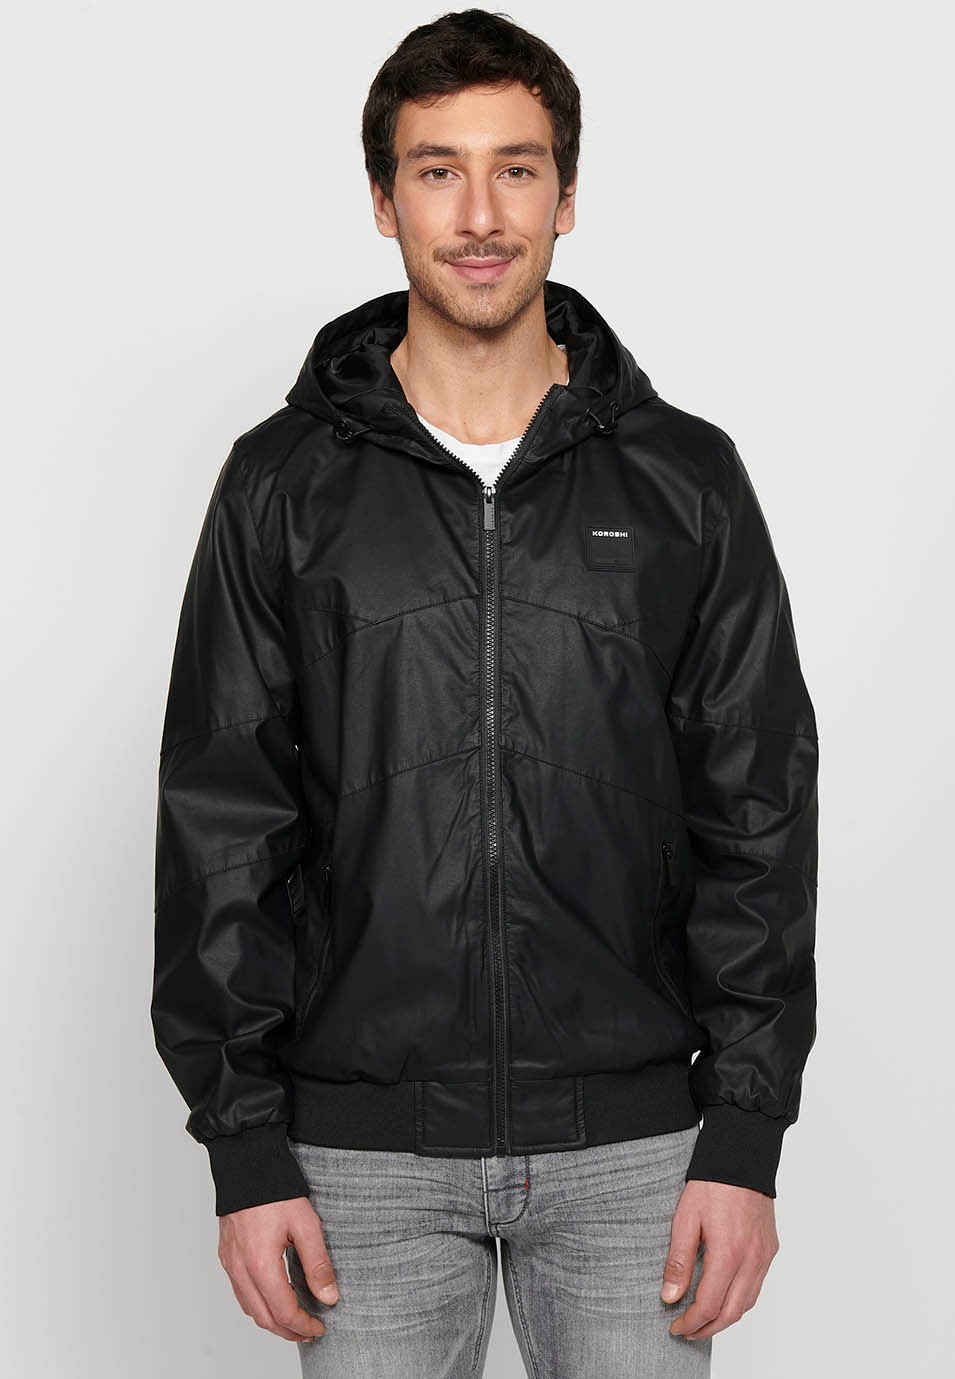 Leather-effect jacket with front zipper closure and hooded collar in black for Men 2